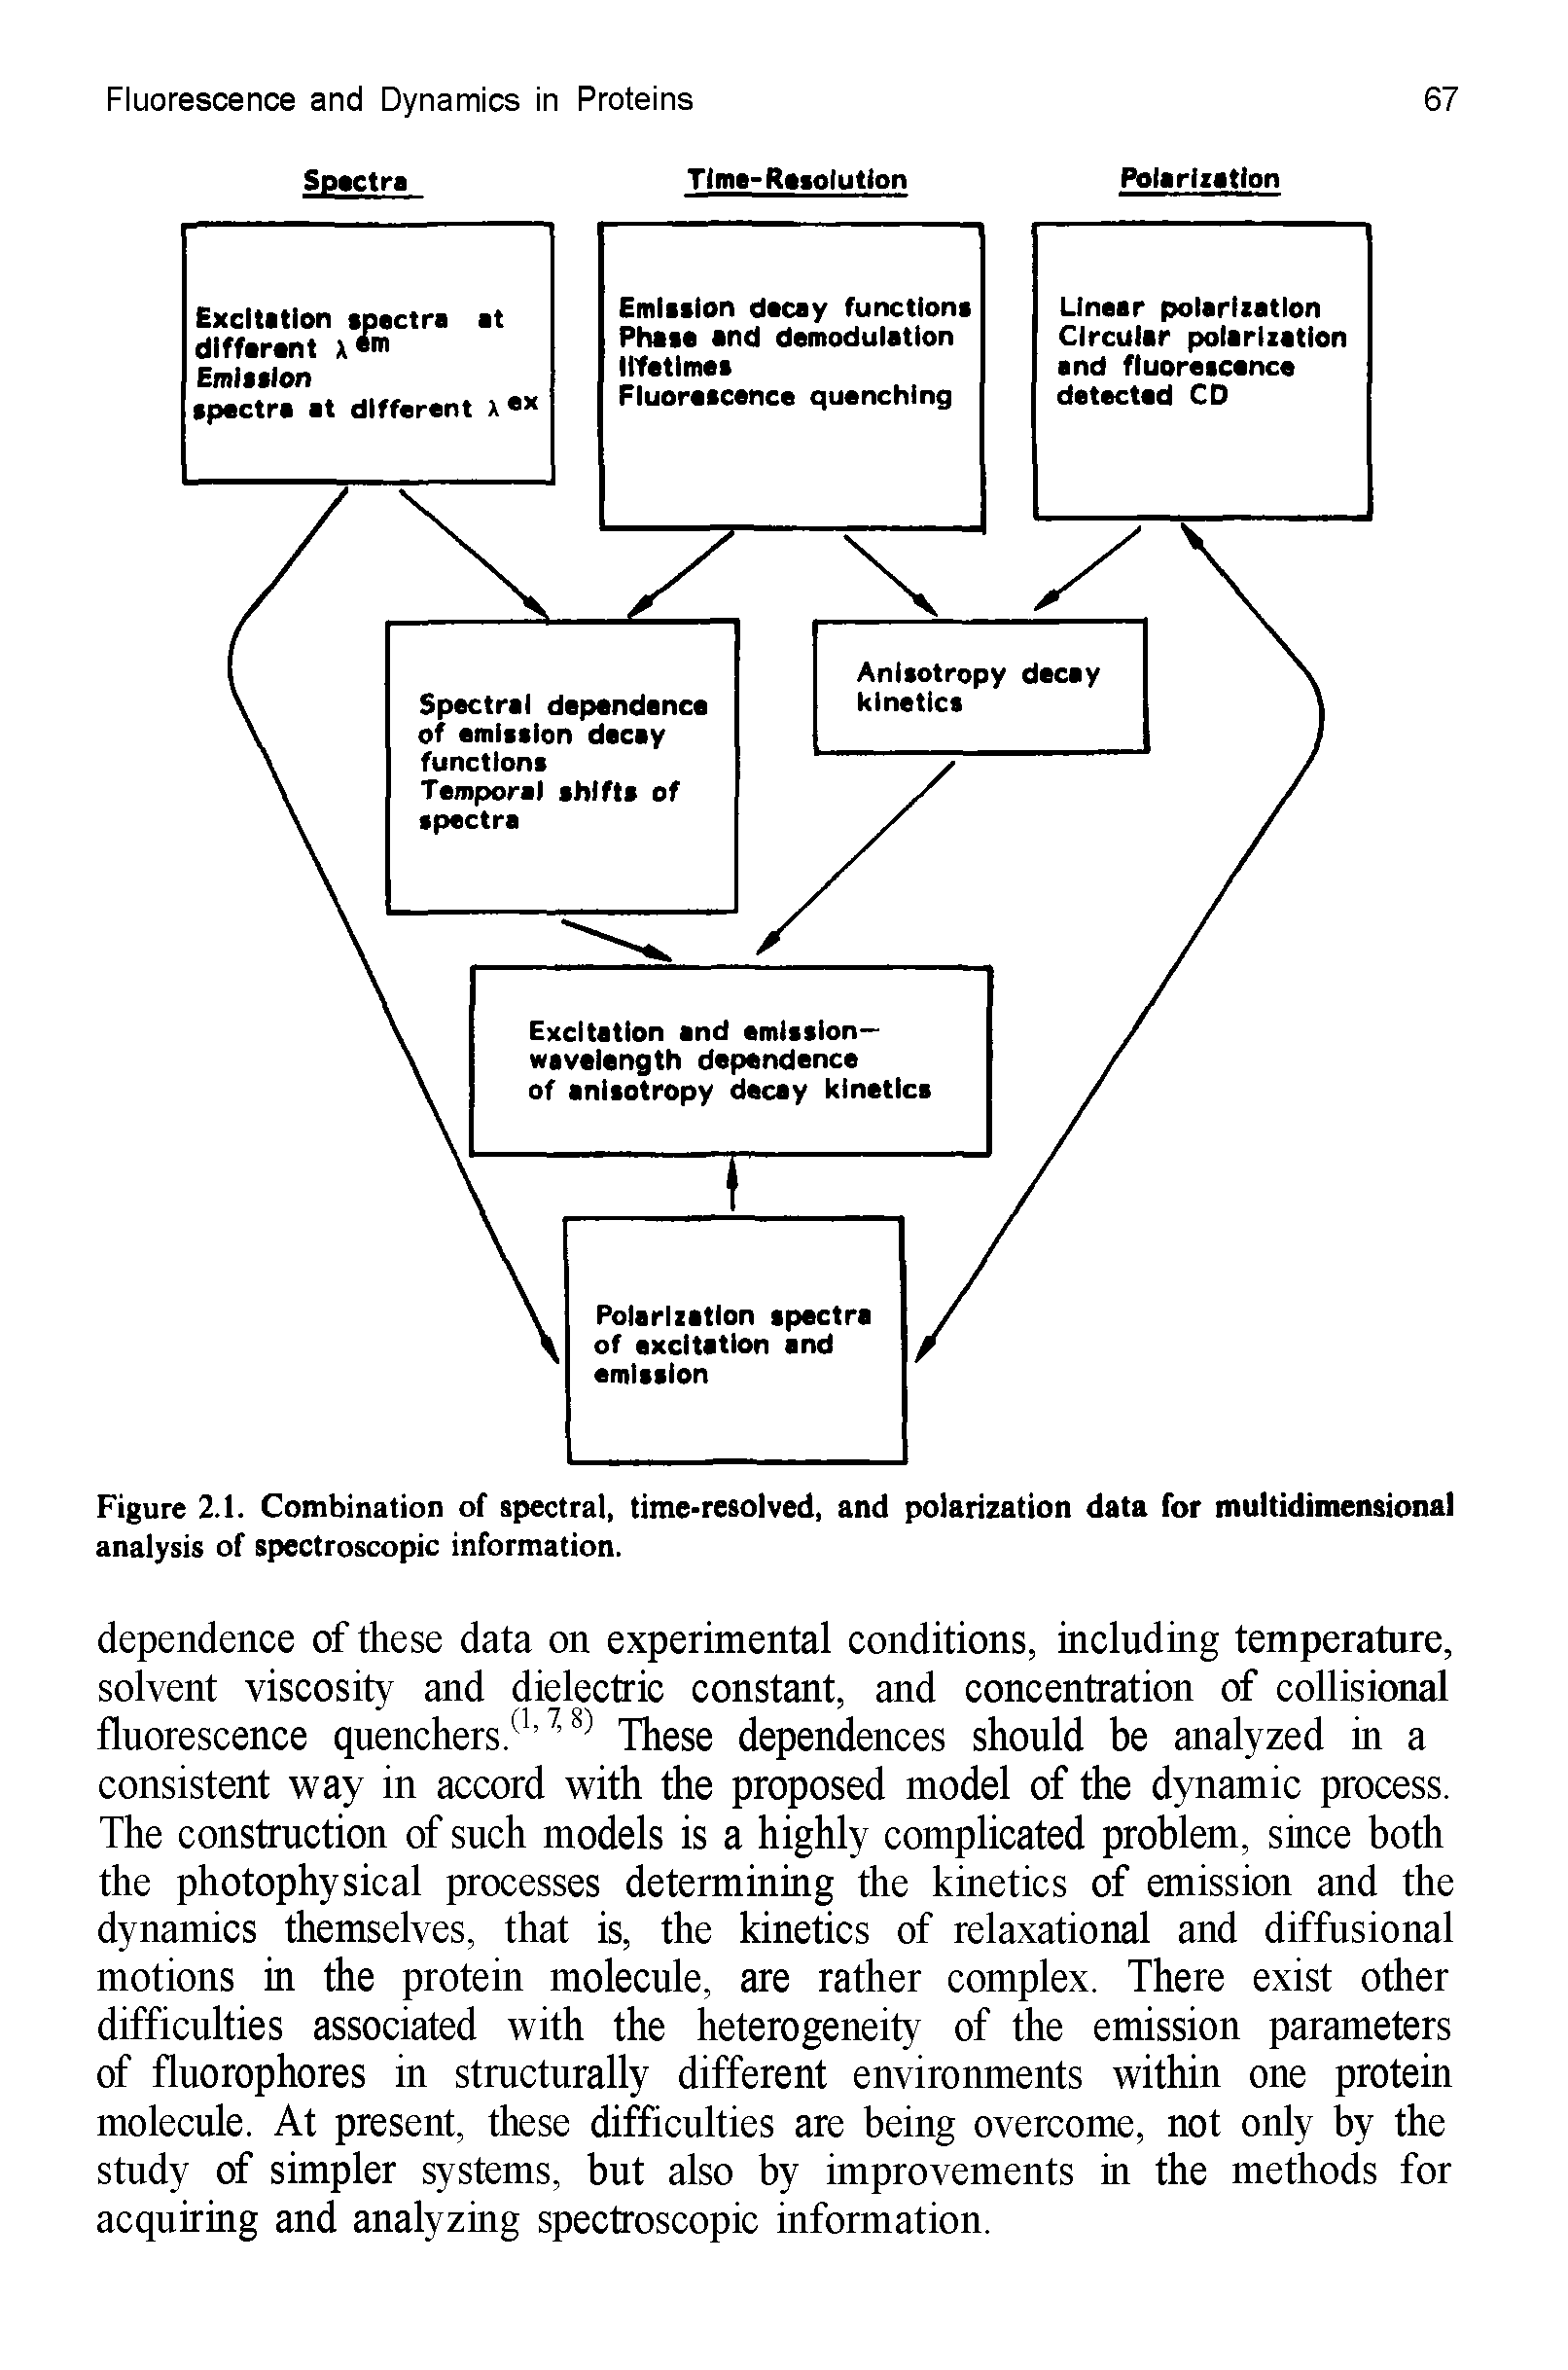 Figure 2.1. Combination of spectral, time-resolved, and polarization data for multidimensional analysis of spectroscopic information.